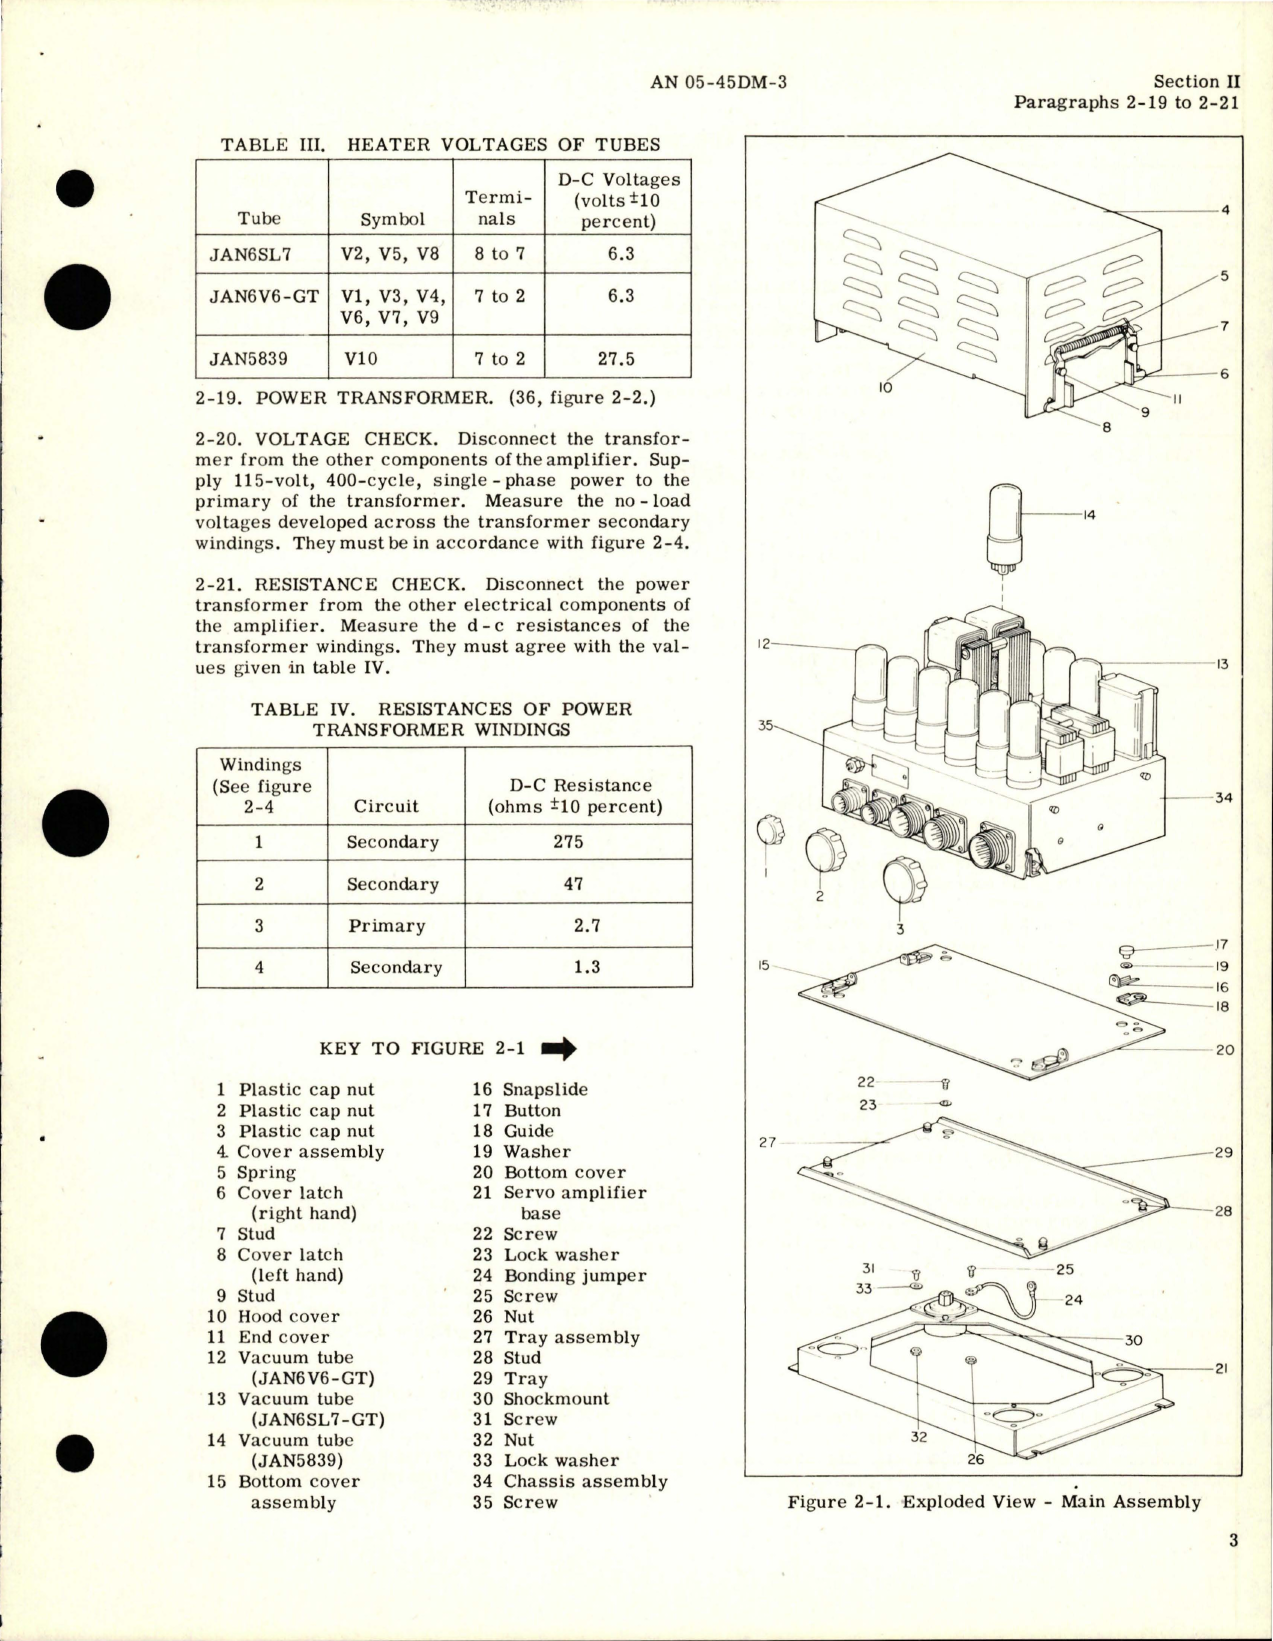 Sample page 7 from AirCorps Library document: Overhaul Instructions for Servo Amplifier - Part 12322-2-A